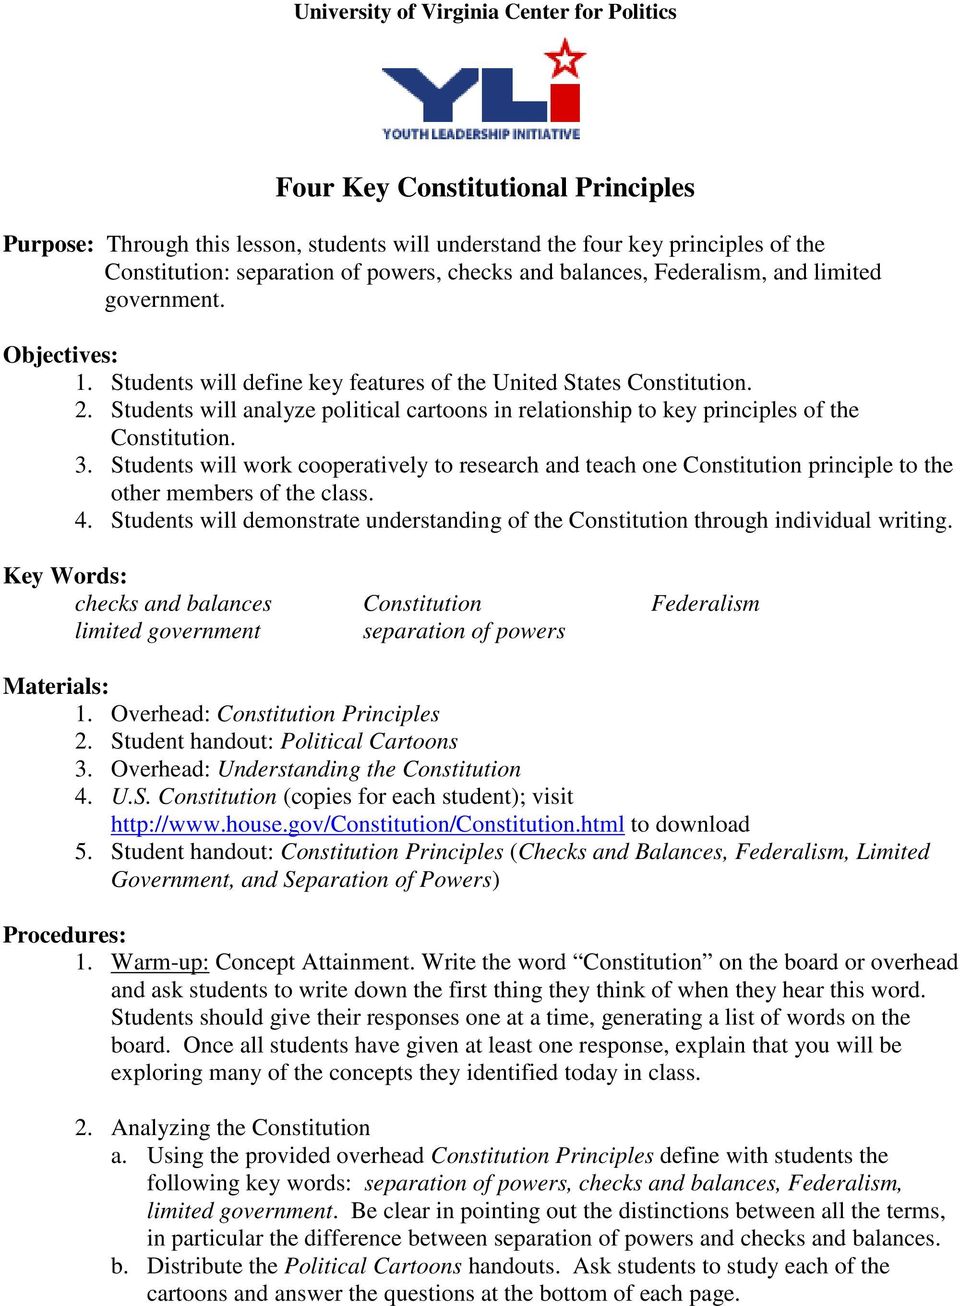 Four Key Constitutional Principles - PDF Free Download Inside Constitutional Principles Worksheet Answers